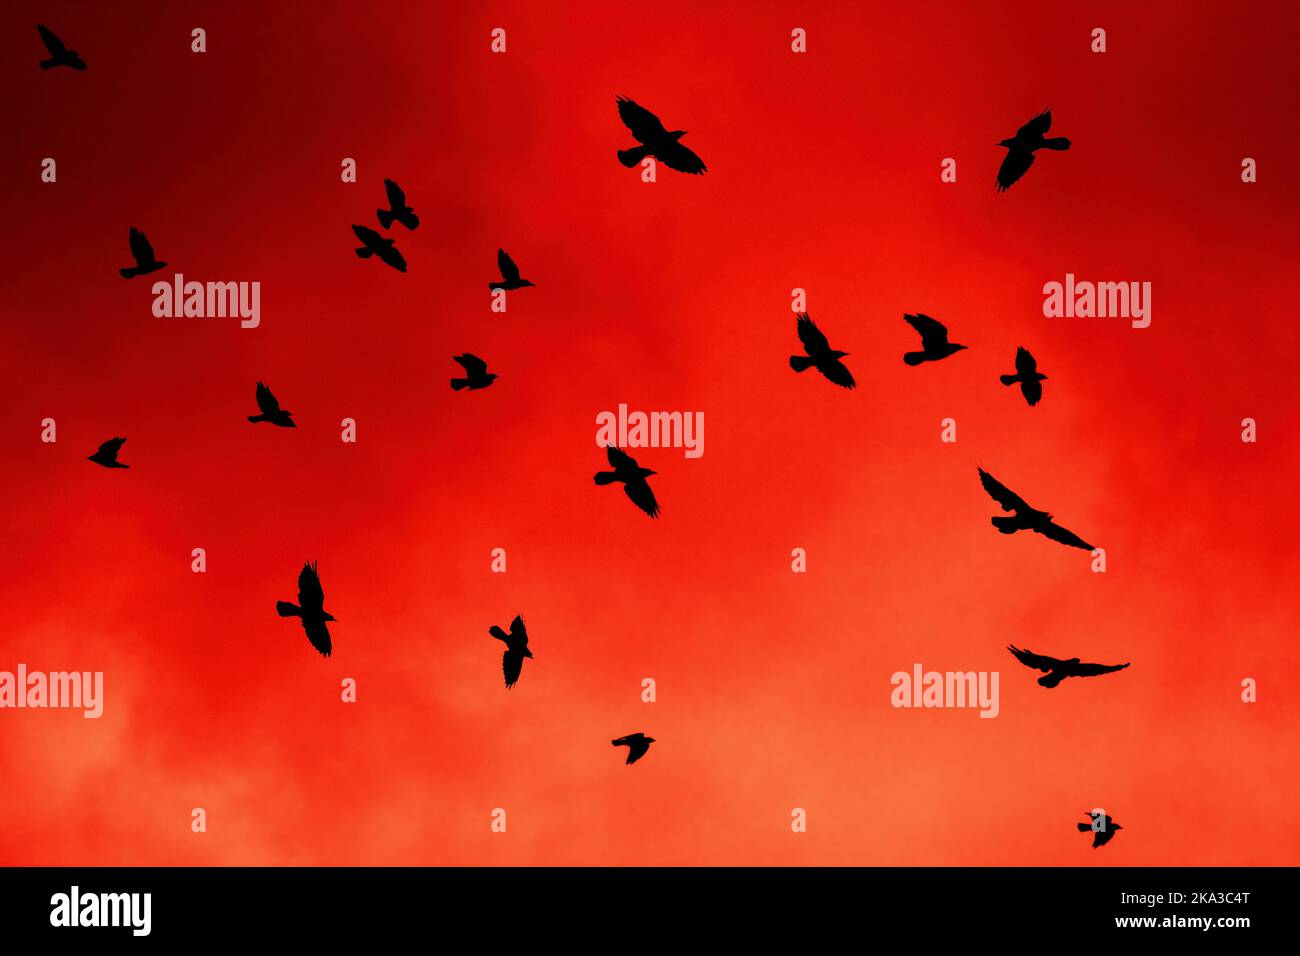 Crows in red sunset sky multiple crow silhouettes 19 flying against bright red orange sky in landscape format artistic effects cloning resizing colour Stock Photo